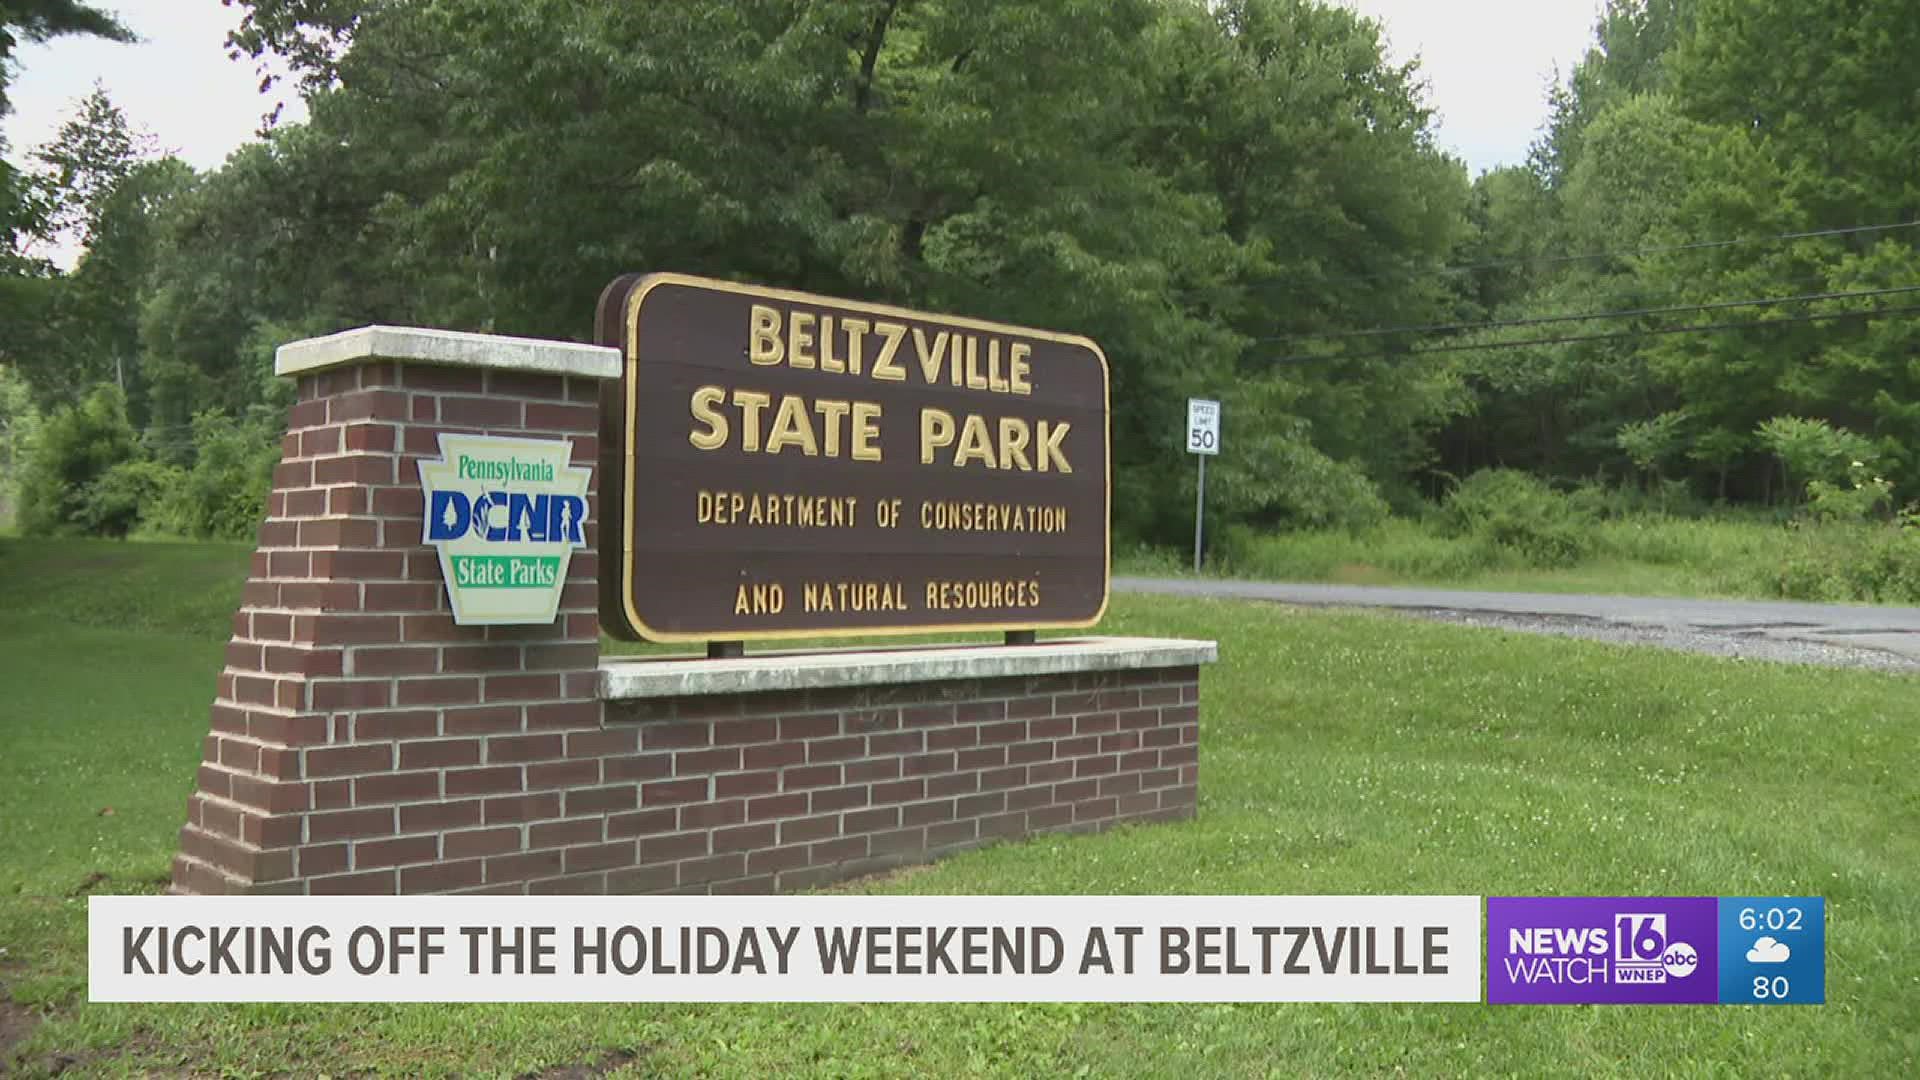 Officials at the state park expect a big crowd over the holiday weekend.